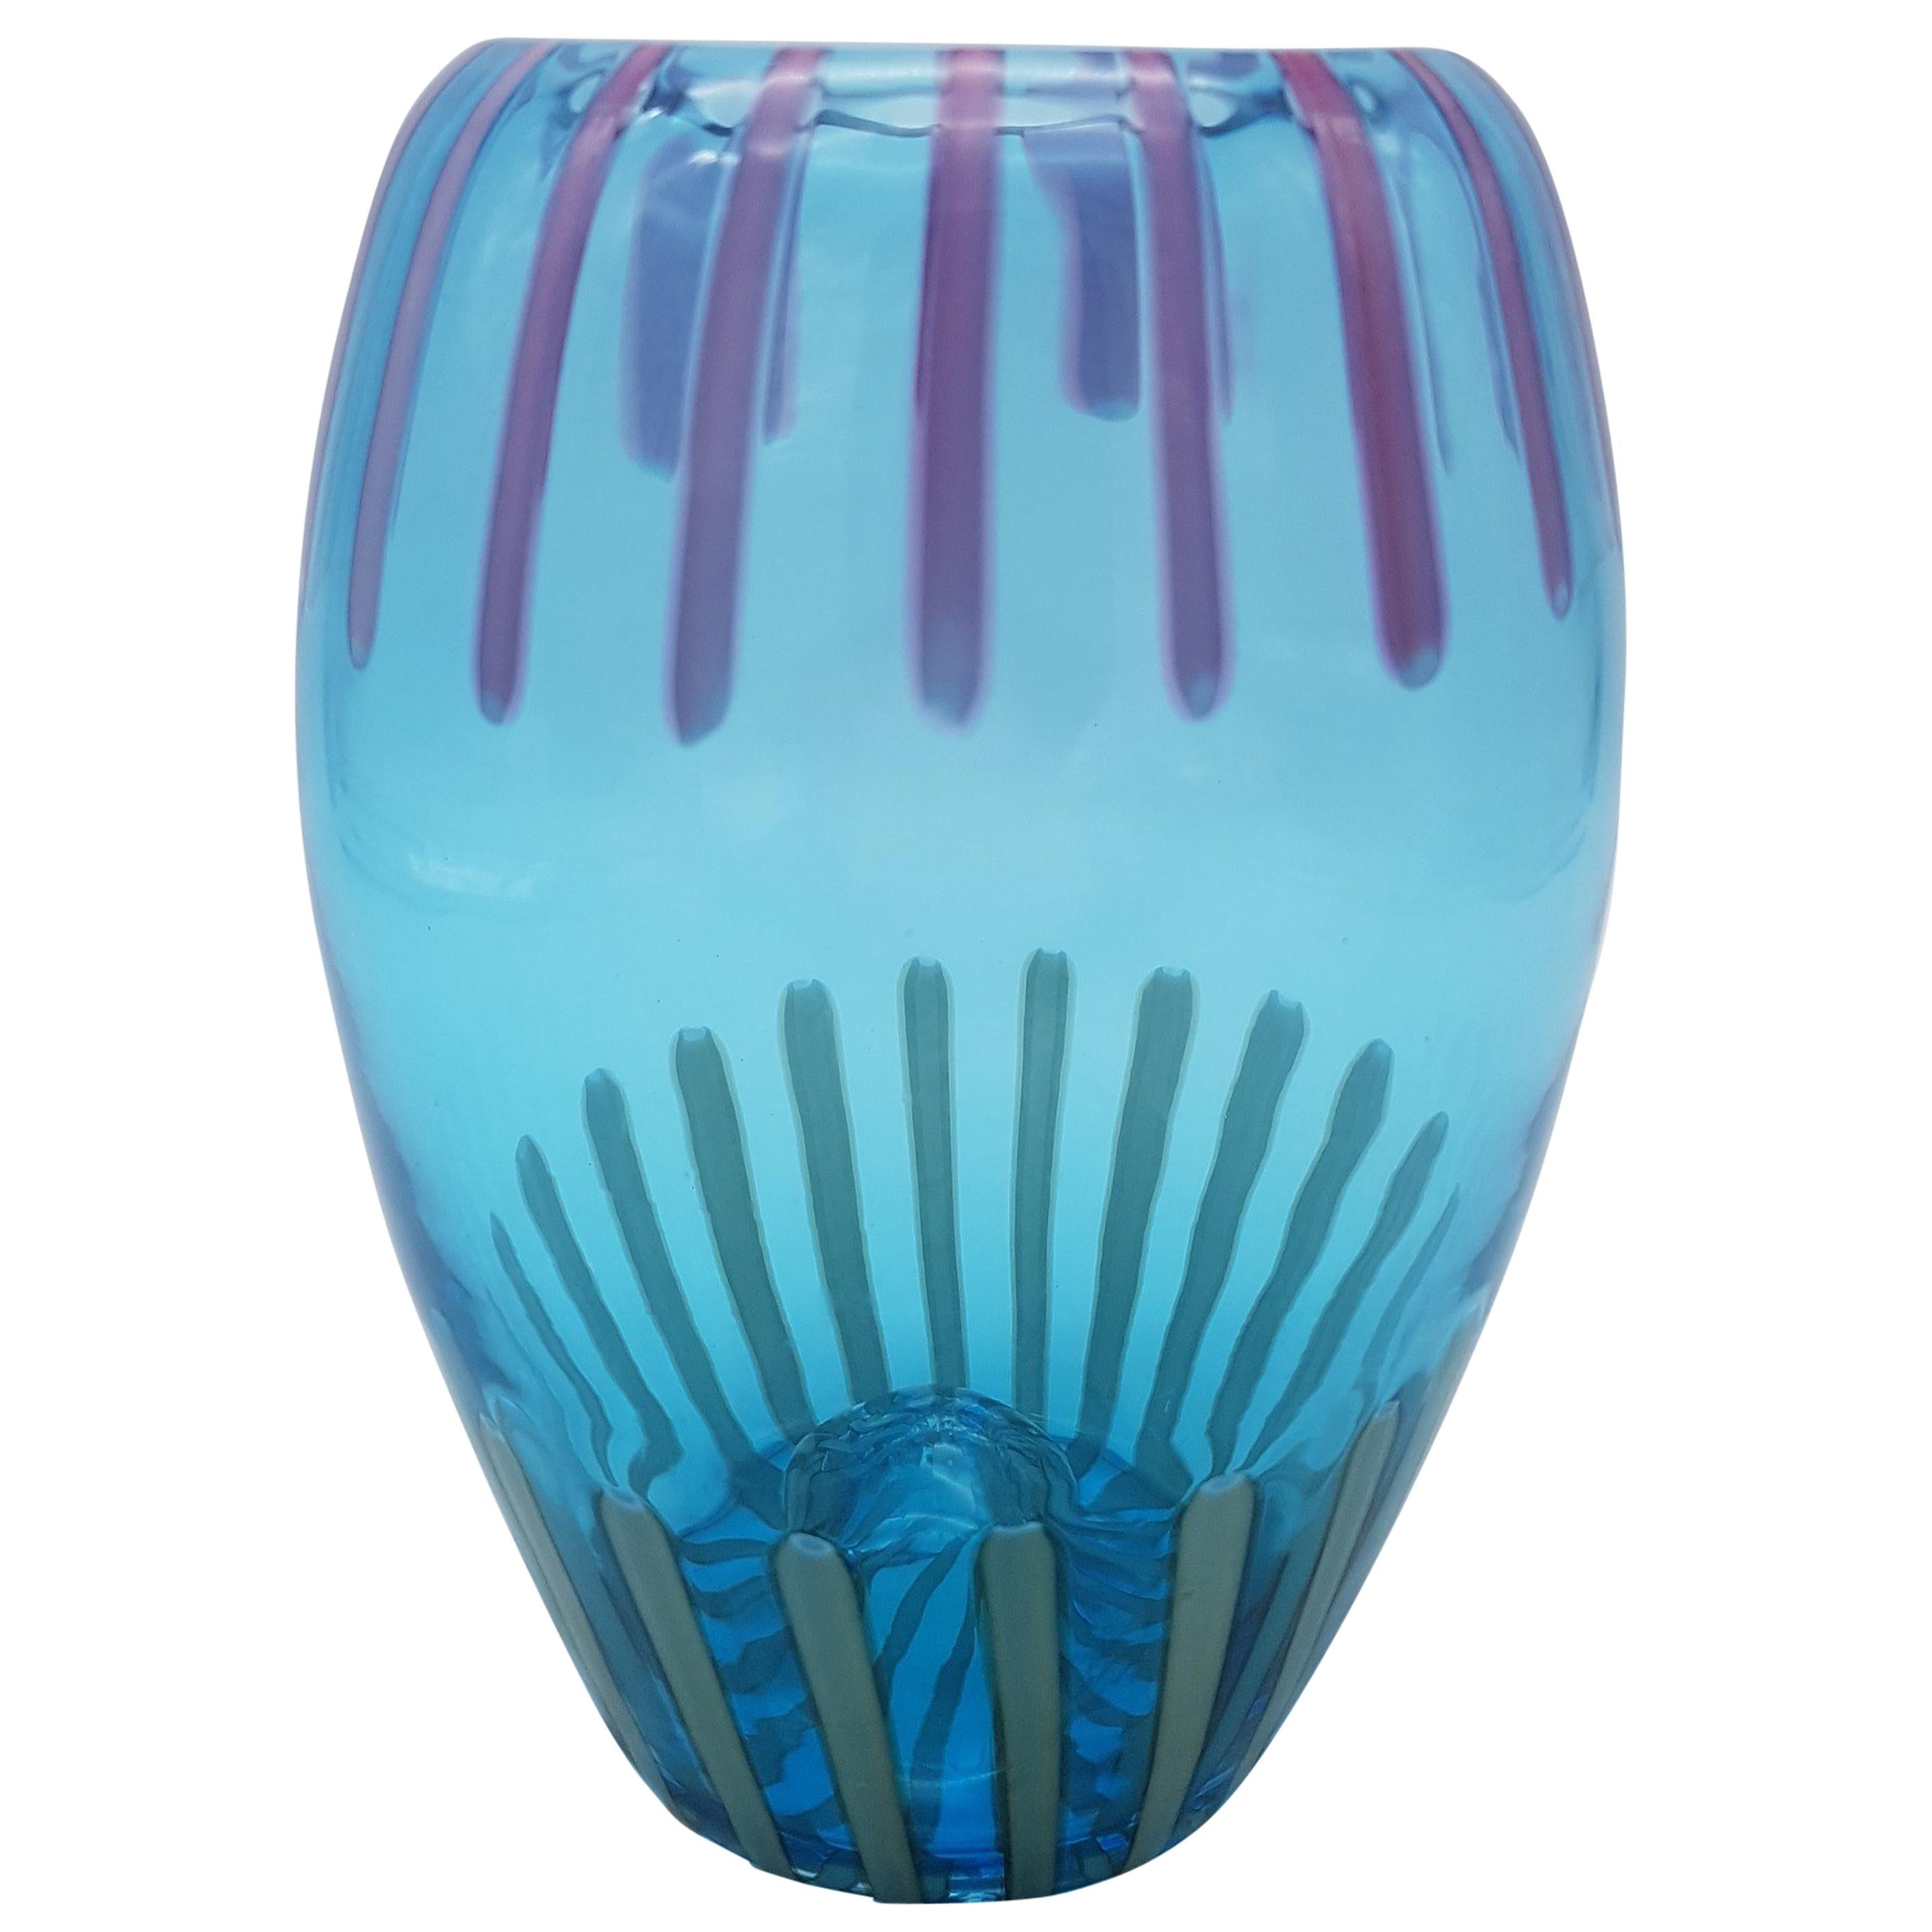 Modern Turquoise/Blue Murano-Glass Vase by Gino Cenedese E Figlio, late 1990s For Sale